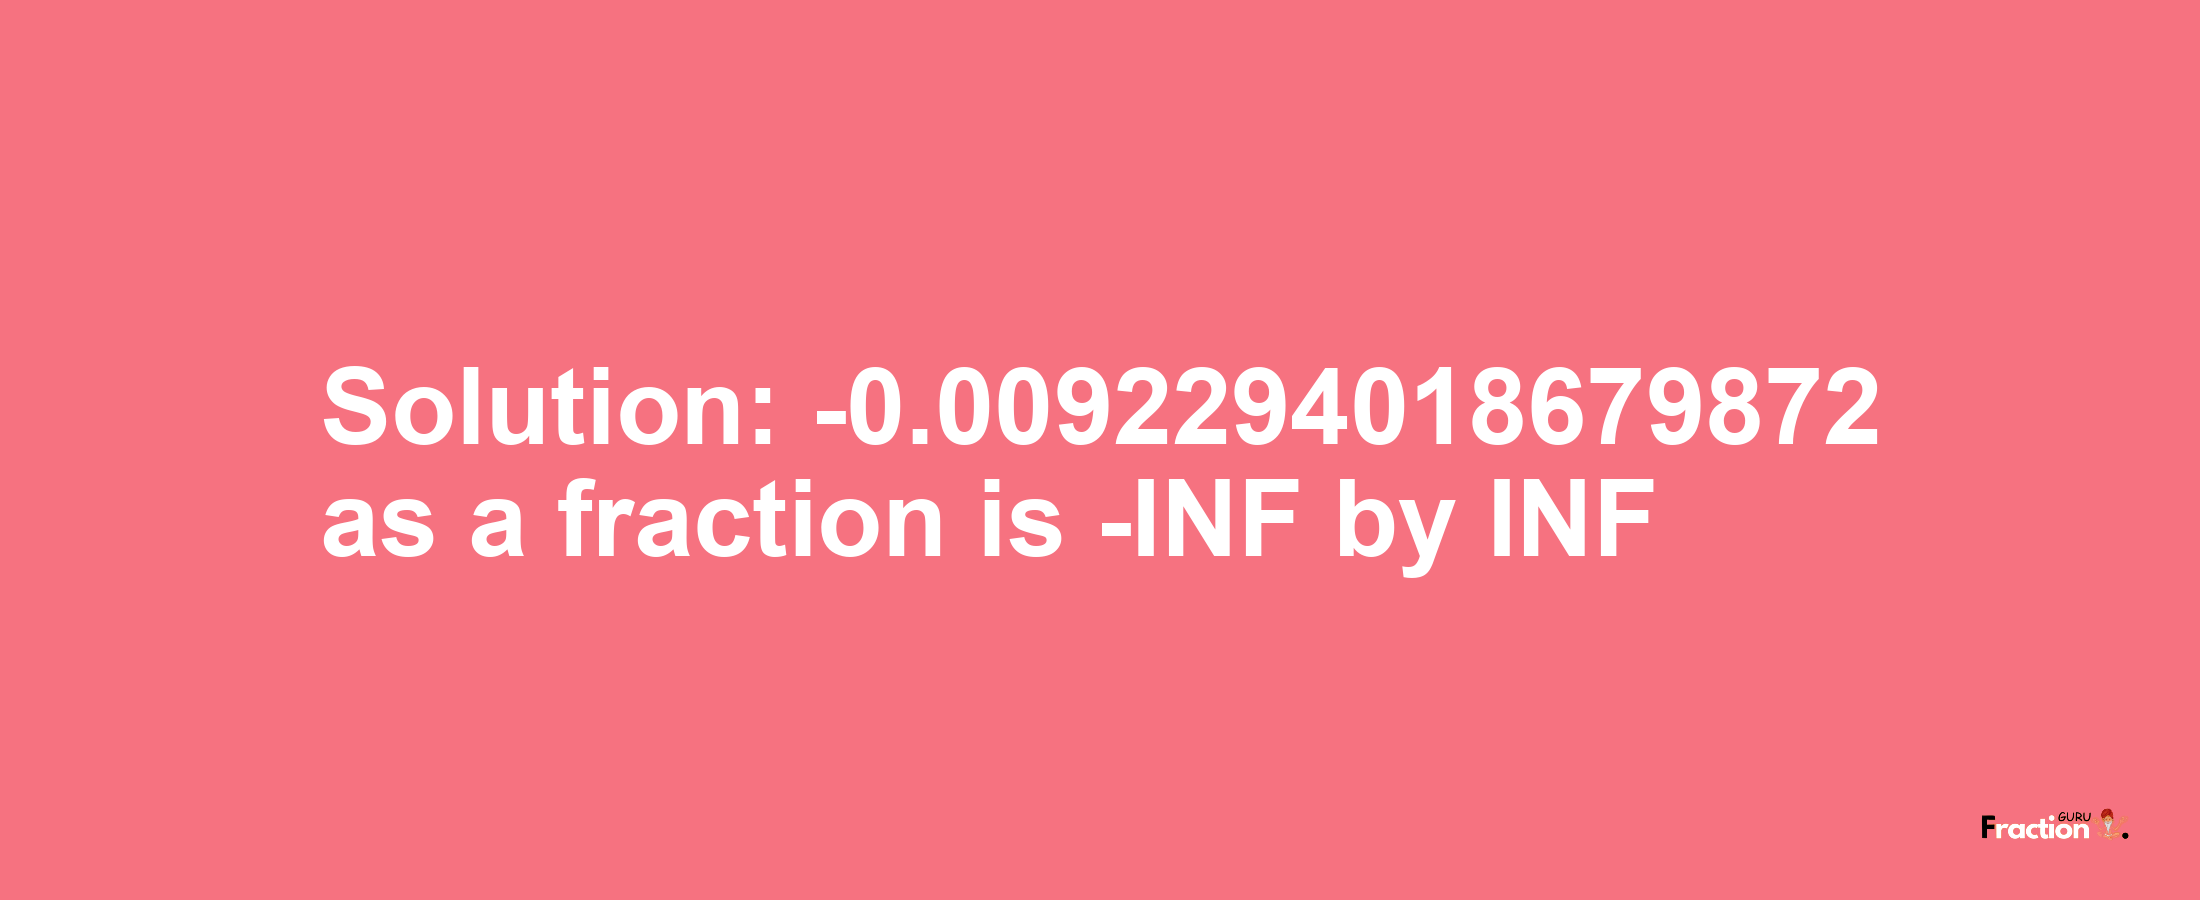 Solution:-0.0092294018679872 as a fraction is -INF/INF